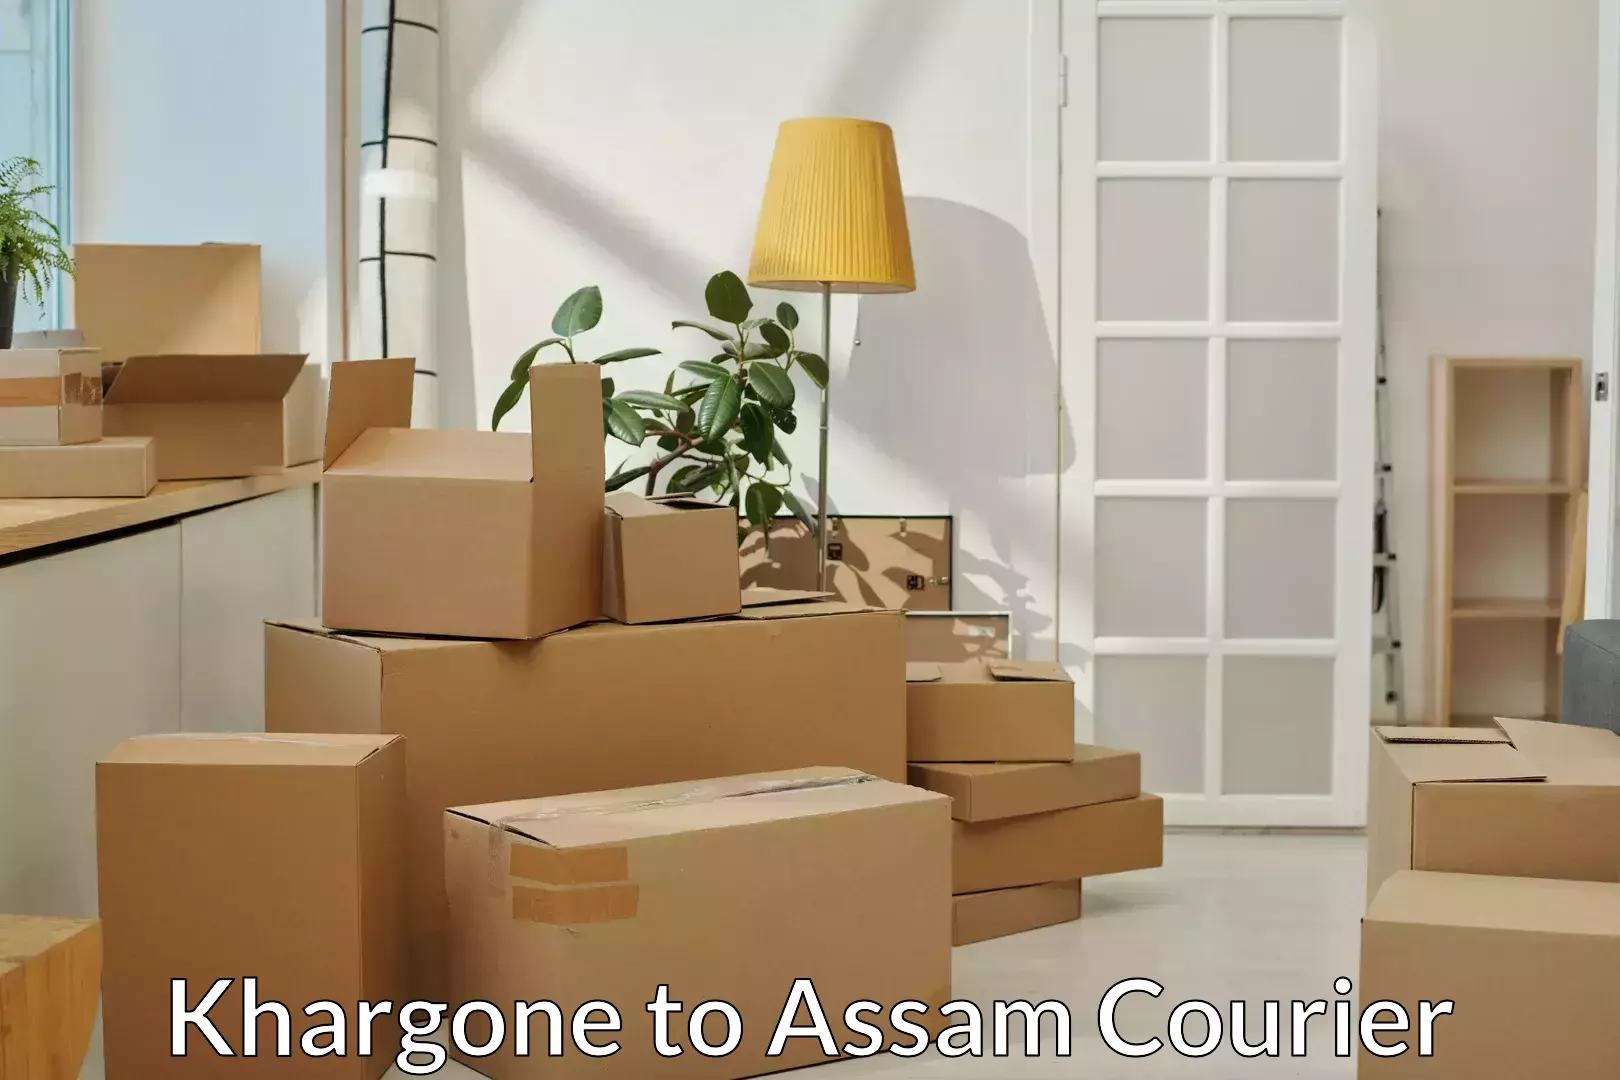 Trusted relocation experts Khargone to Assam